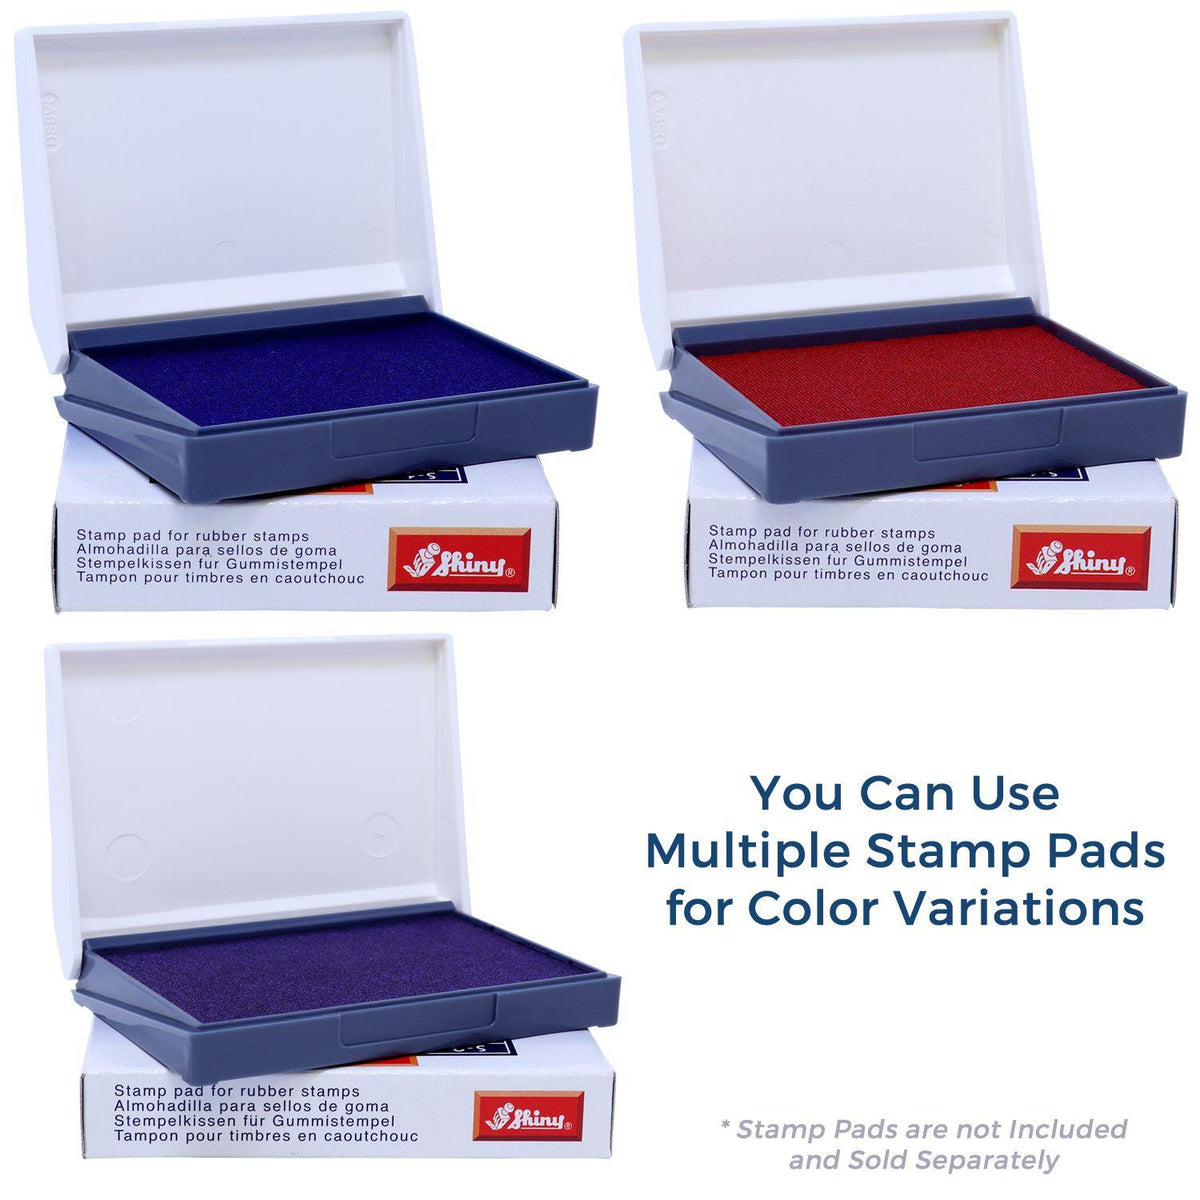 Stamp Pads for Large Advance Directive Rubber Stamp Available